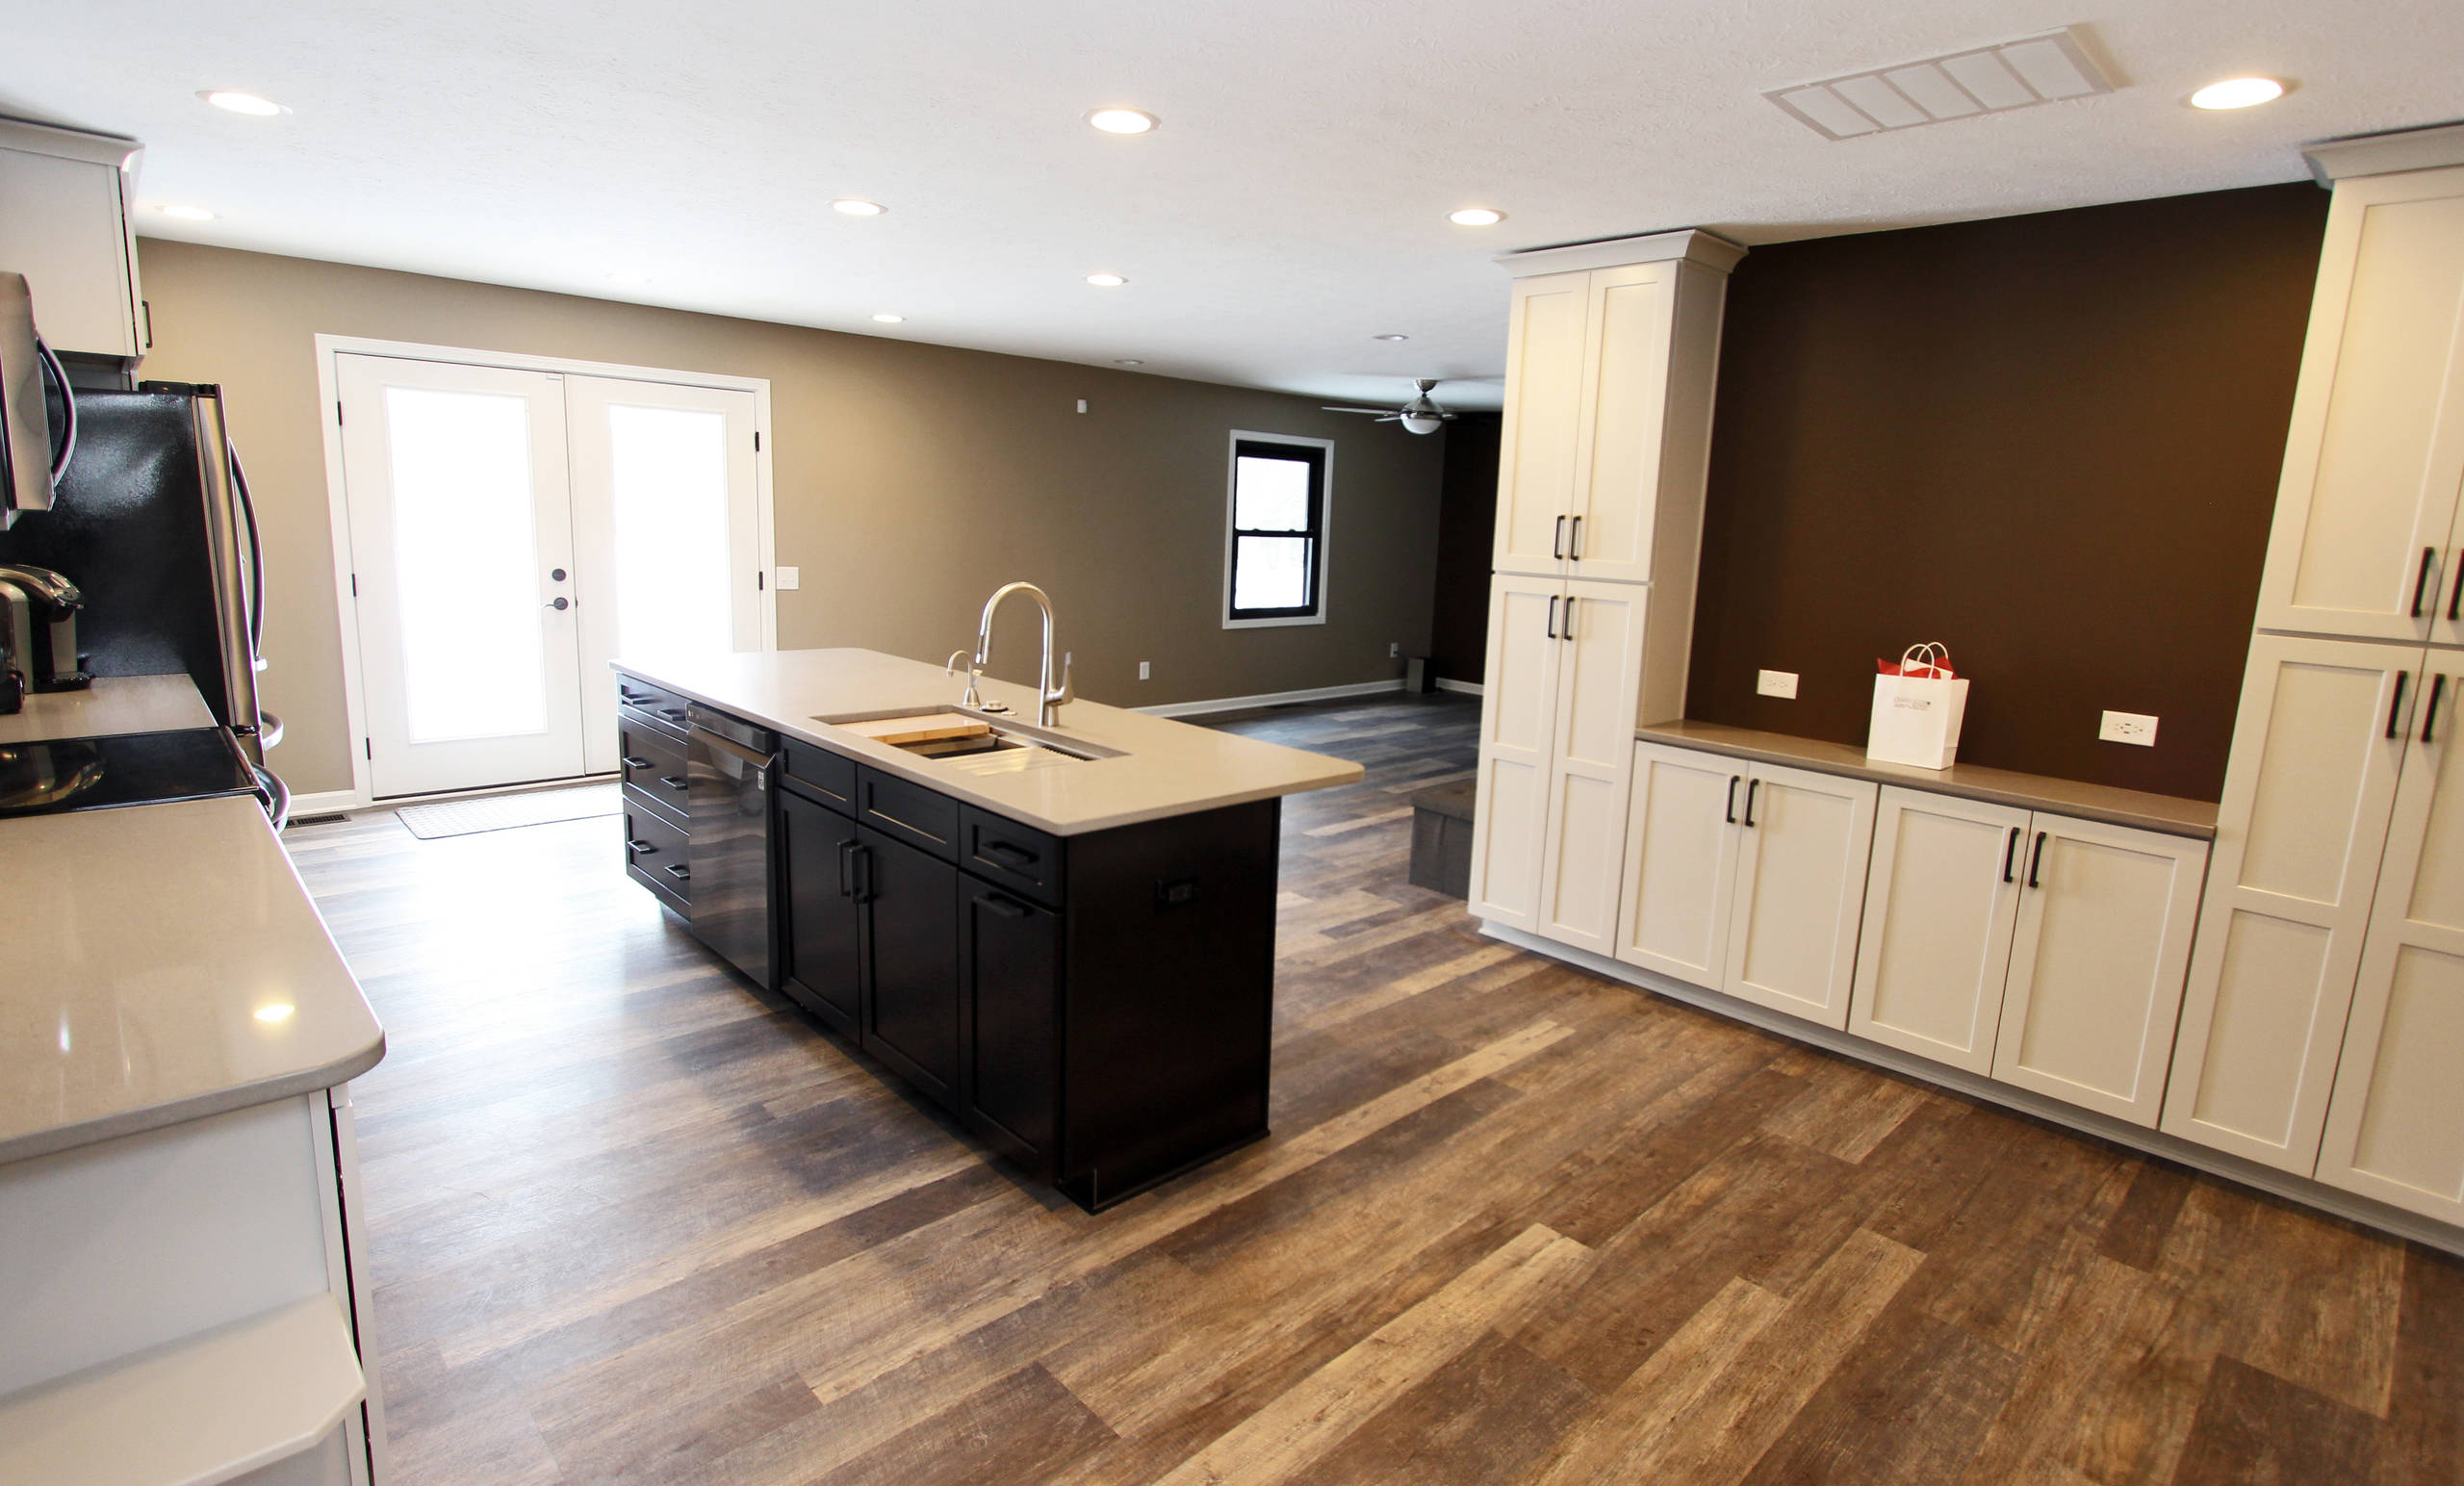 Waypoint Painted Harbor Cabinets And Lenova Kitchen Cleveland By Cabinet S Top Houzz